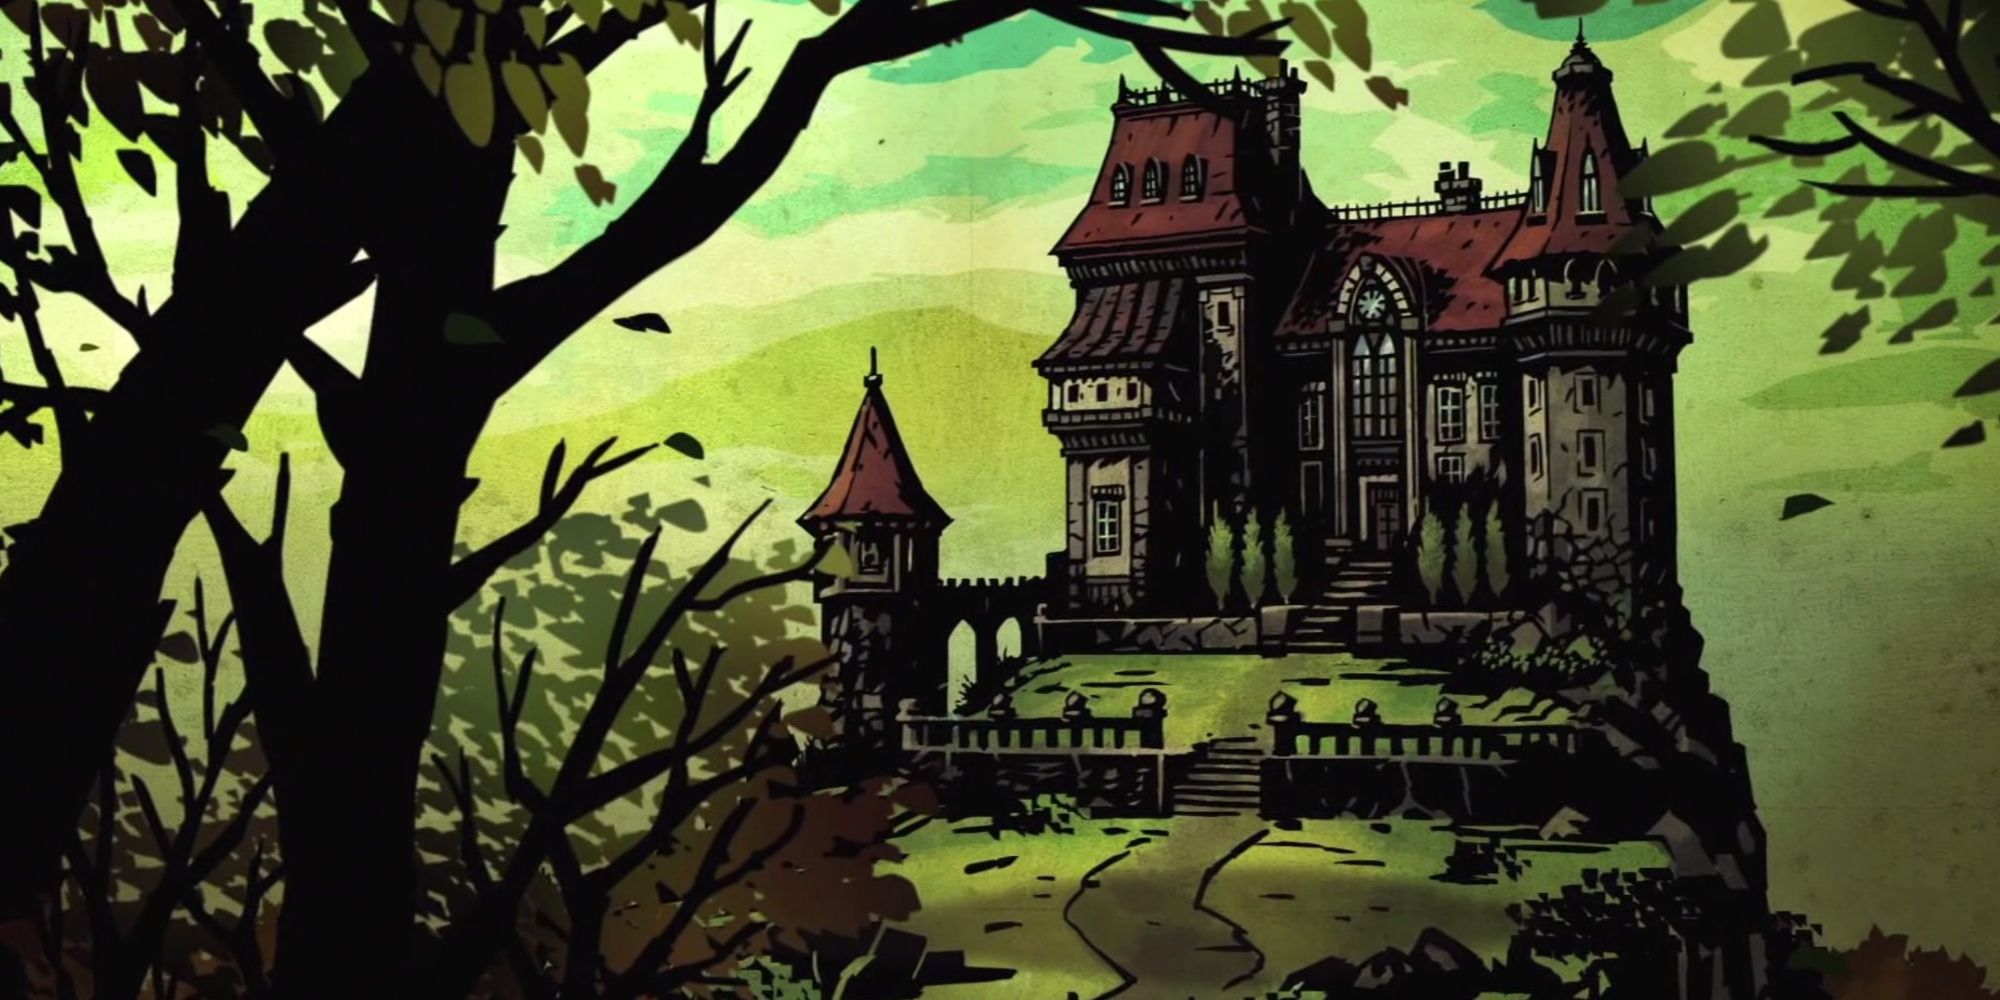 Darket Dungeon manor in the introduction sequence